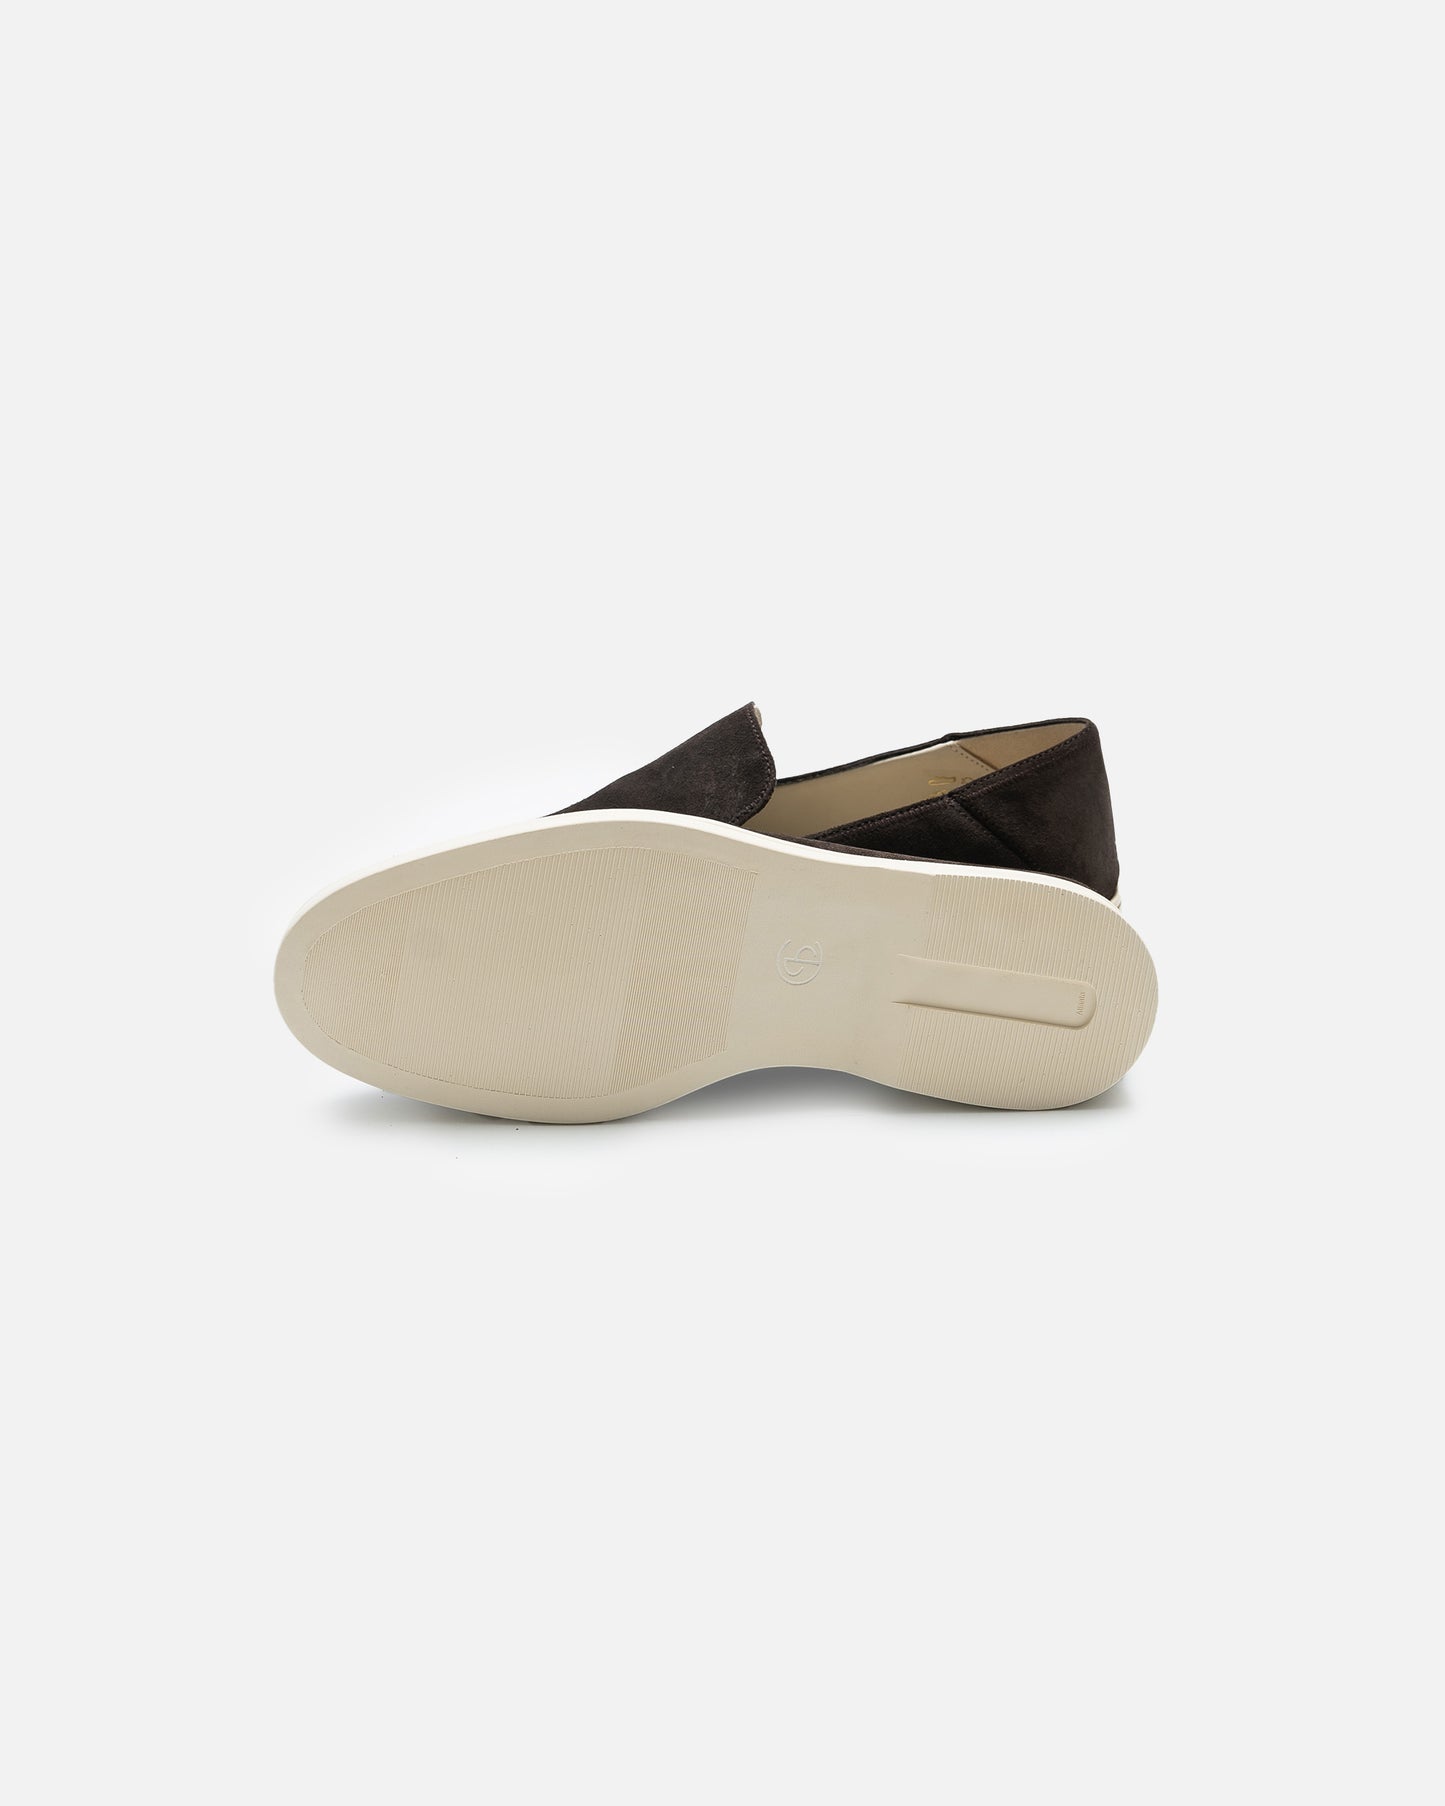 CQP VICE Unlined Slip-on Dusty Brown